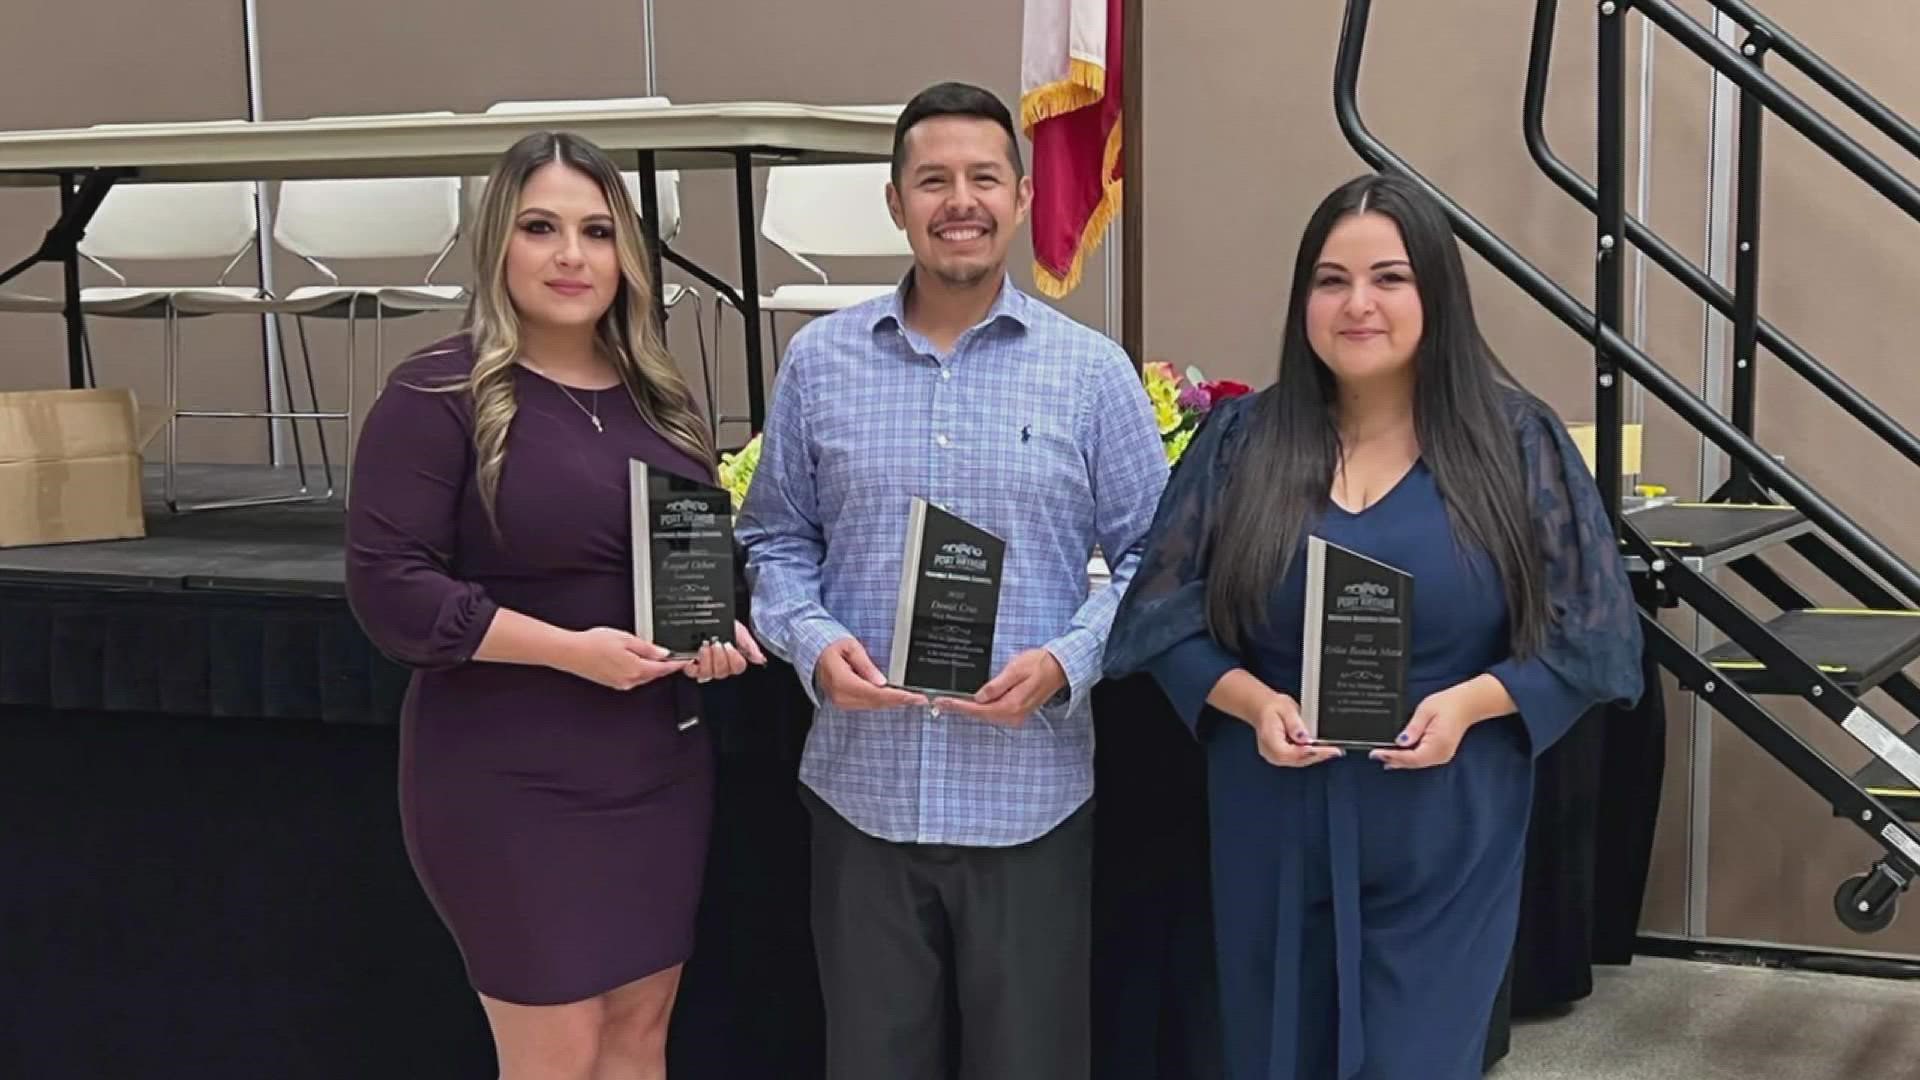 They reached out to help Spanish-speaking business owners find the necessary resources in Port Arthur. They also awarded scholarships to two college students.